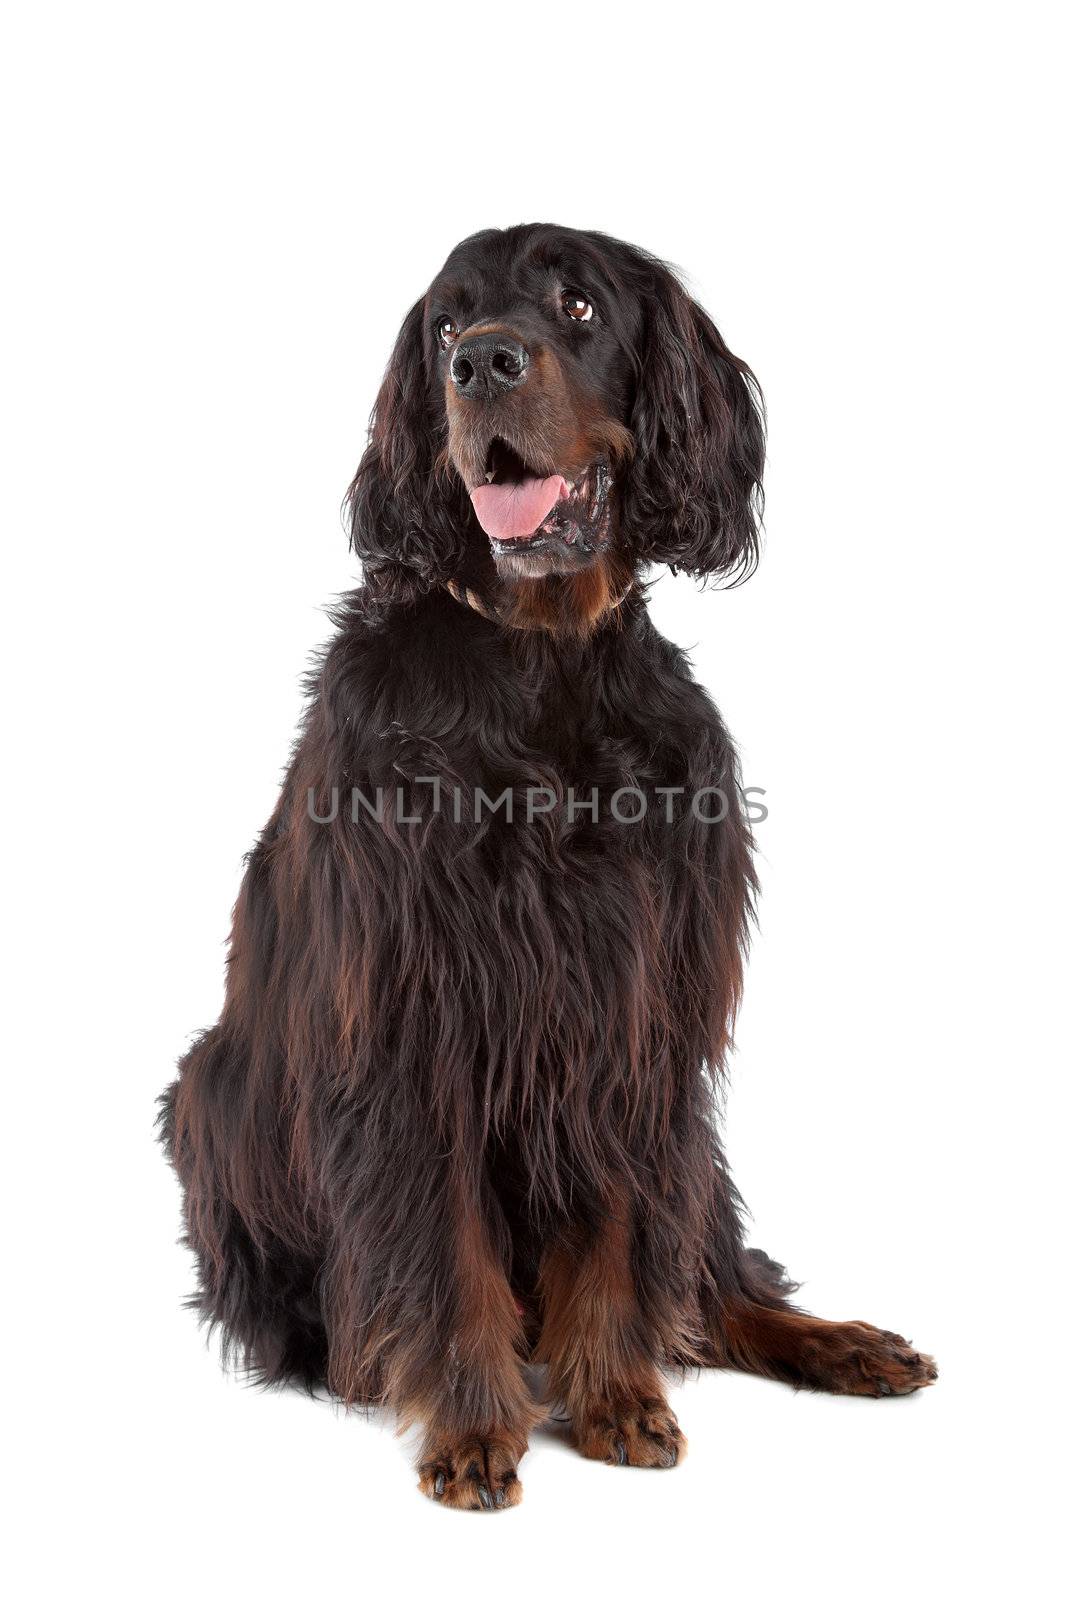 Irish Setter dog sitting with the tongue out, on a white background